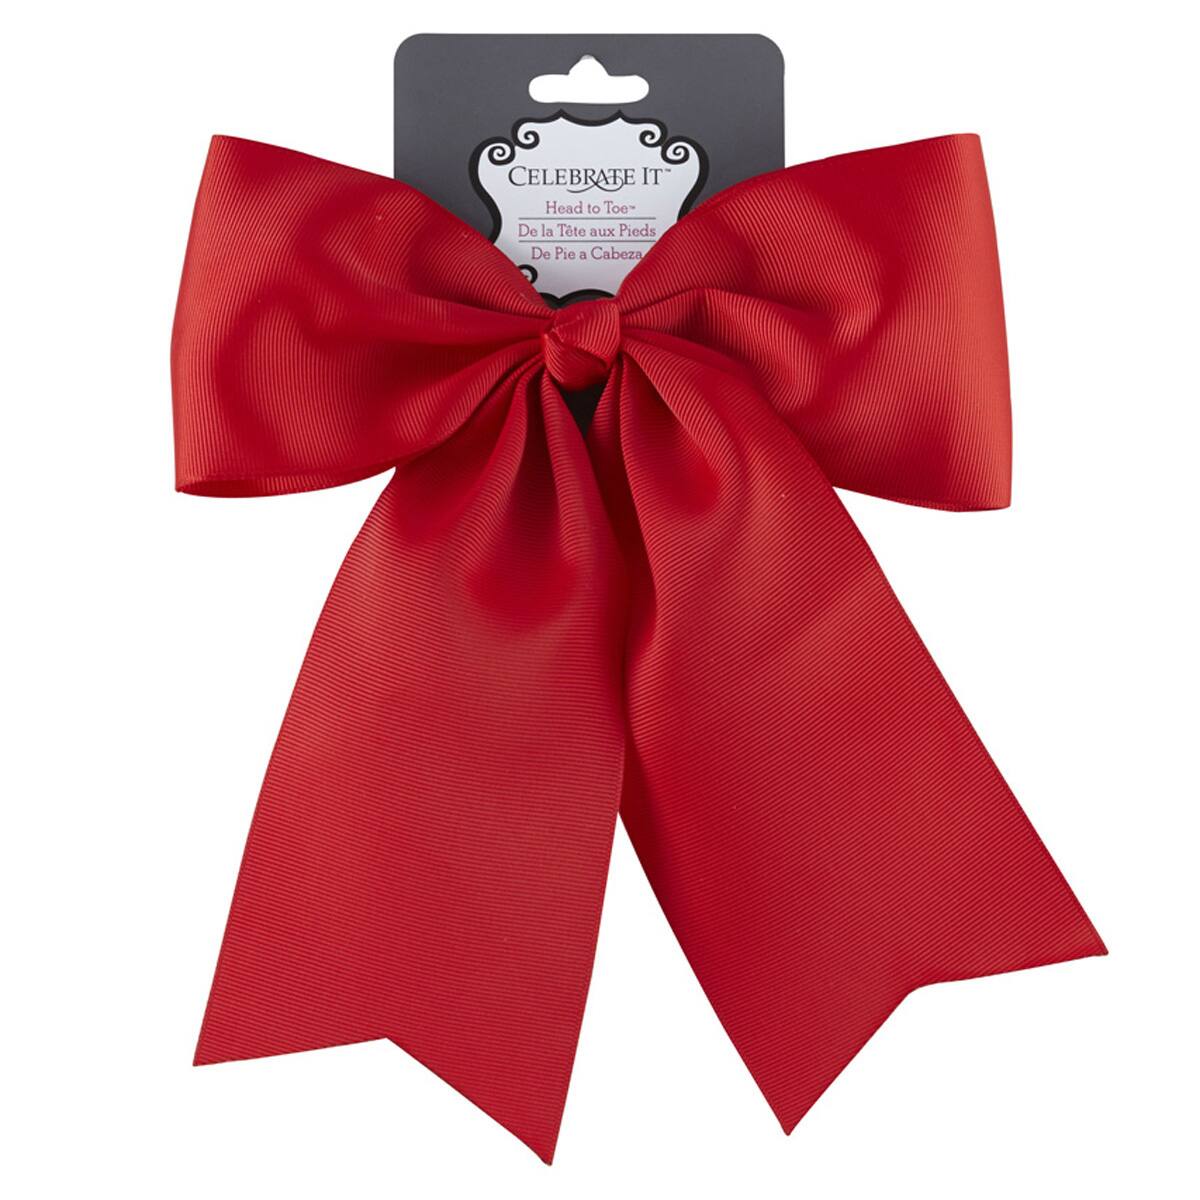 Head to Toe™ Hair Bow by Celebrate It 